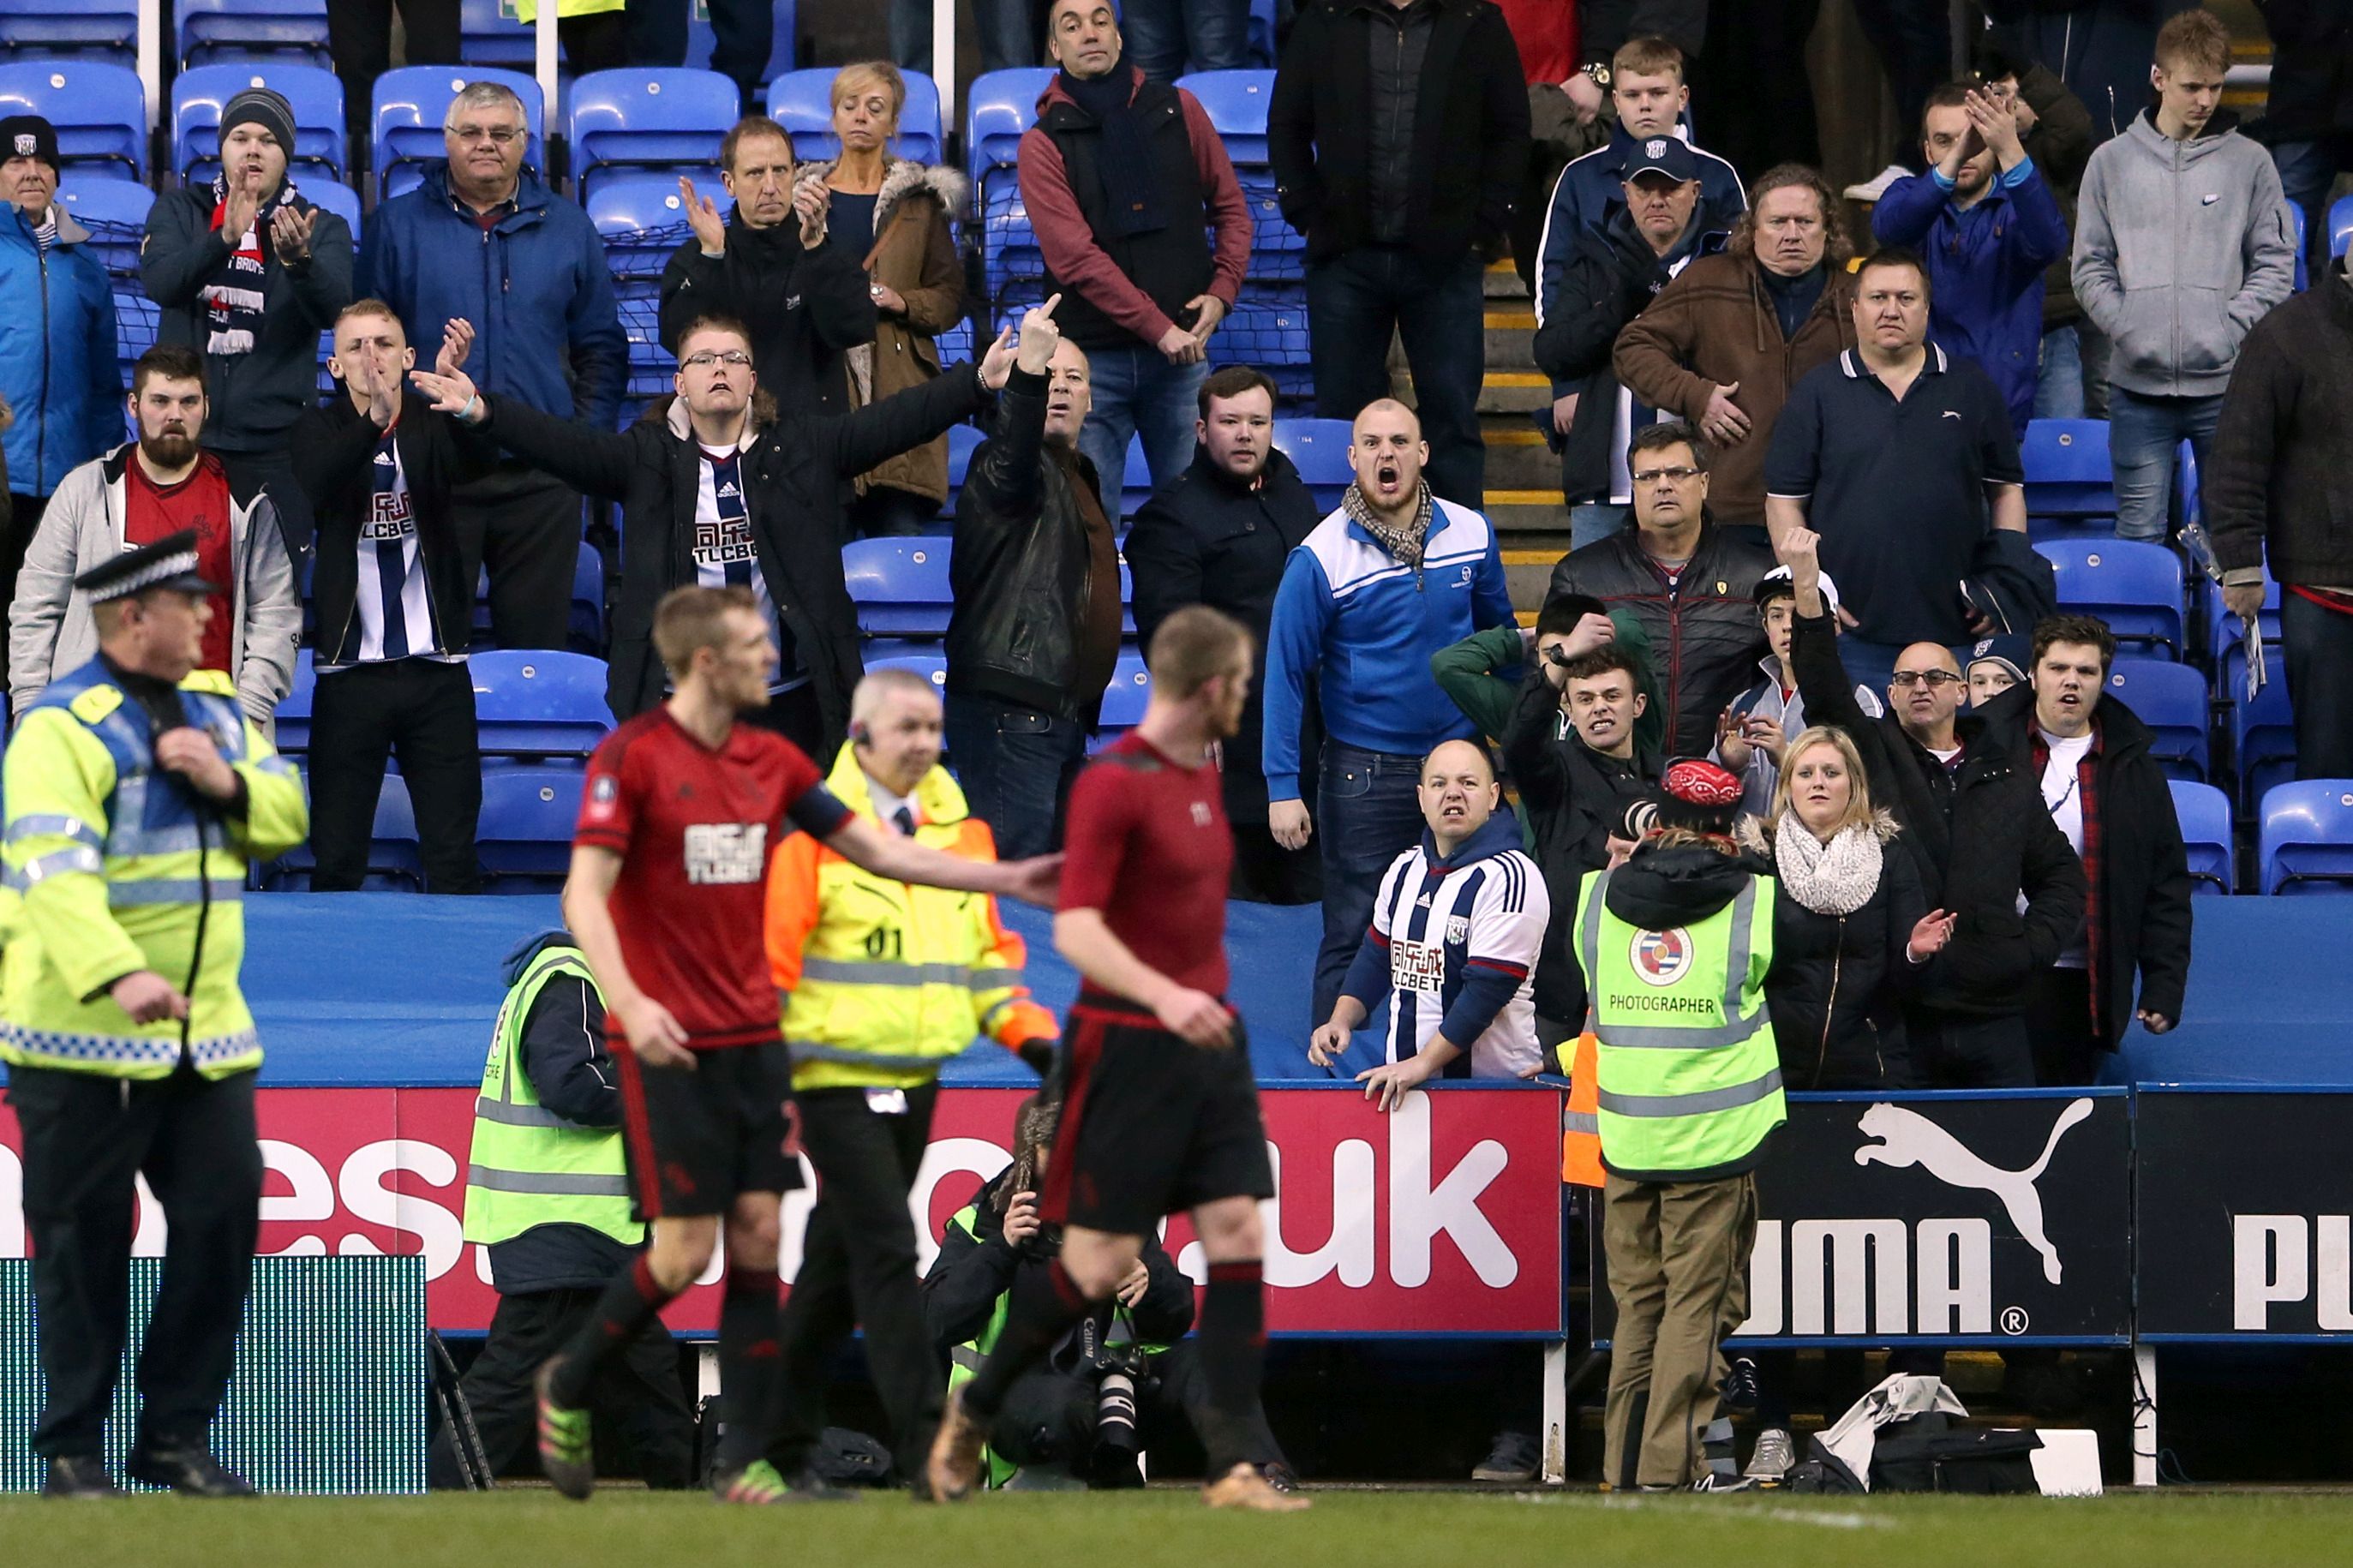 Picture by: Scott Heavey / PA Wire/Press Association Images  West Bromwich Albion fans voice their anger towards Chris Brunt (centre) and Darren Fletcher after the final whistle, during the Emirates FA Cup, fifth round match at the Madejski Stadium, Reading.